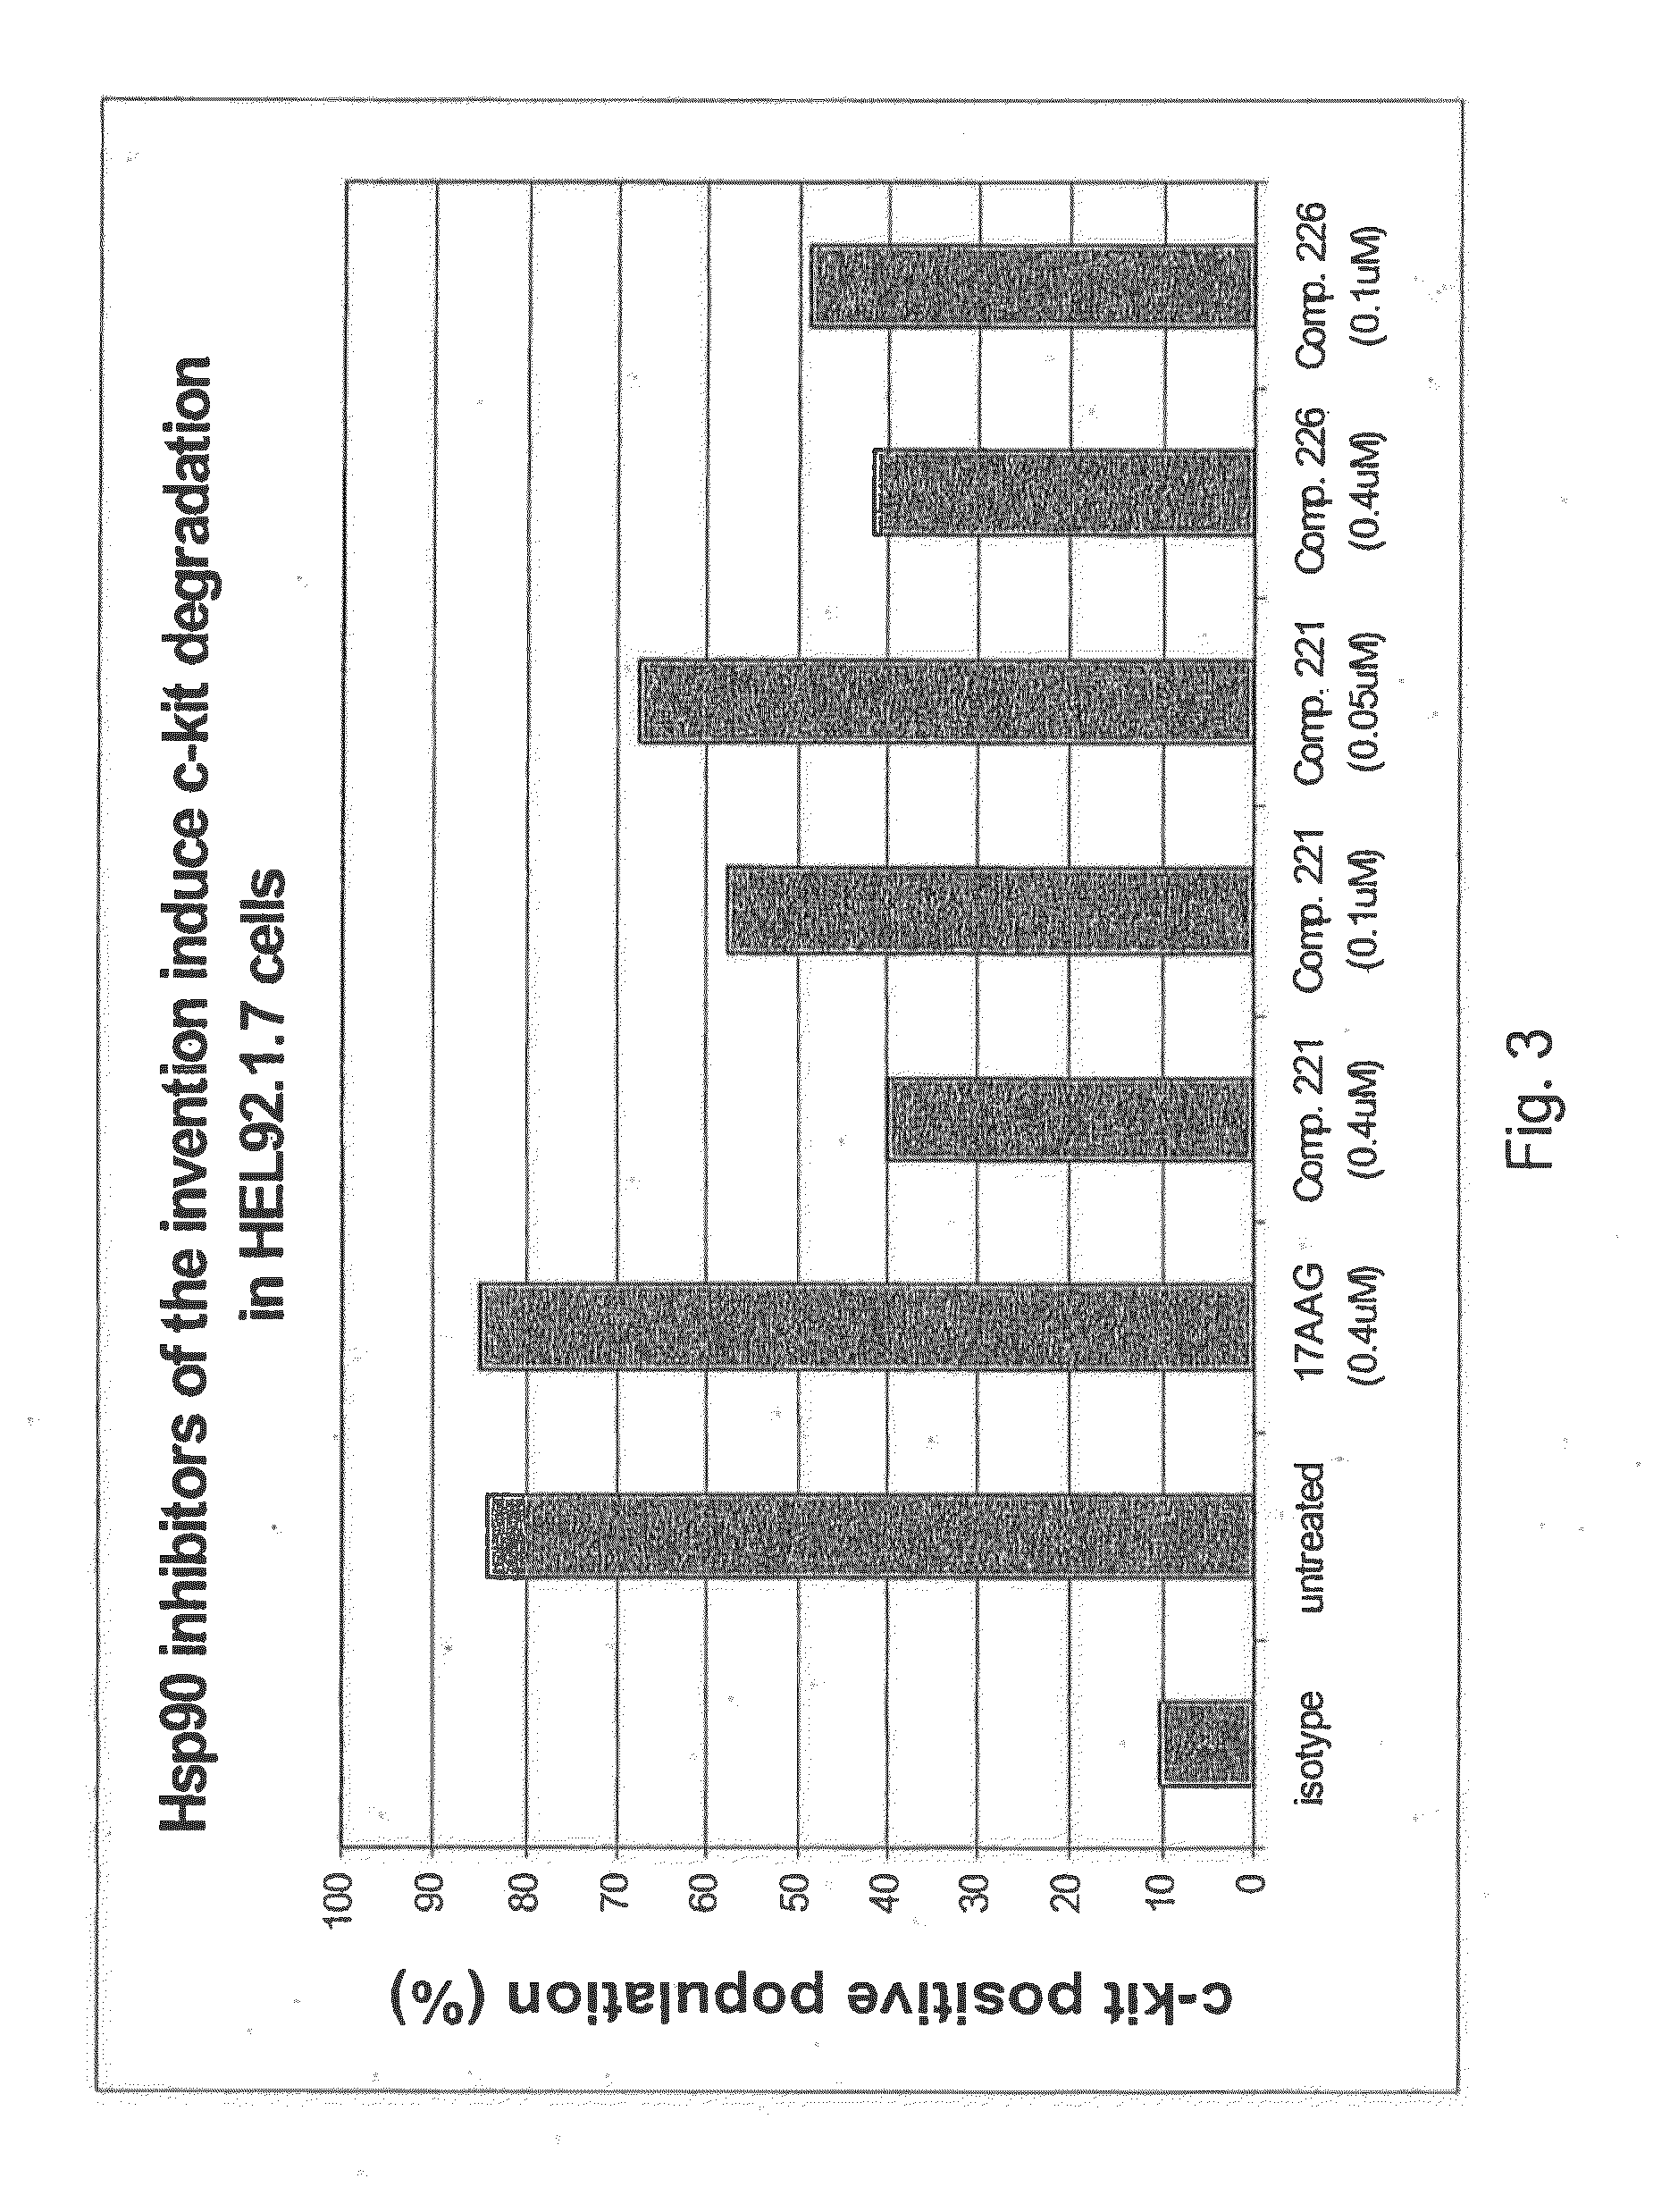 Compounds that modulate hsp90 activity and methods for identifying same